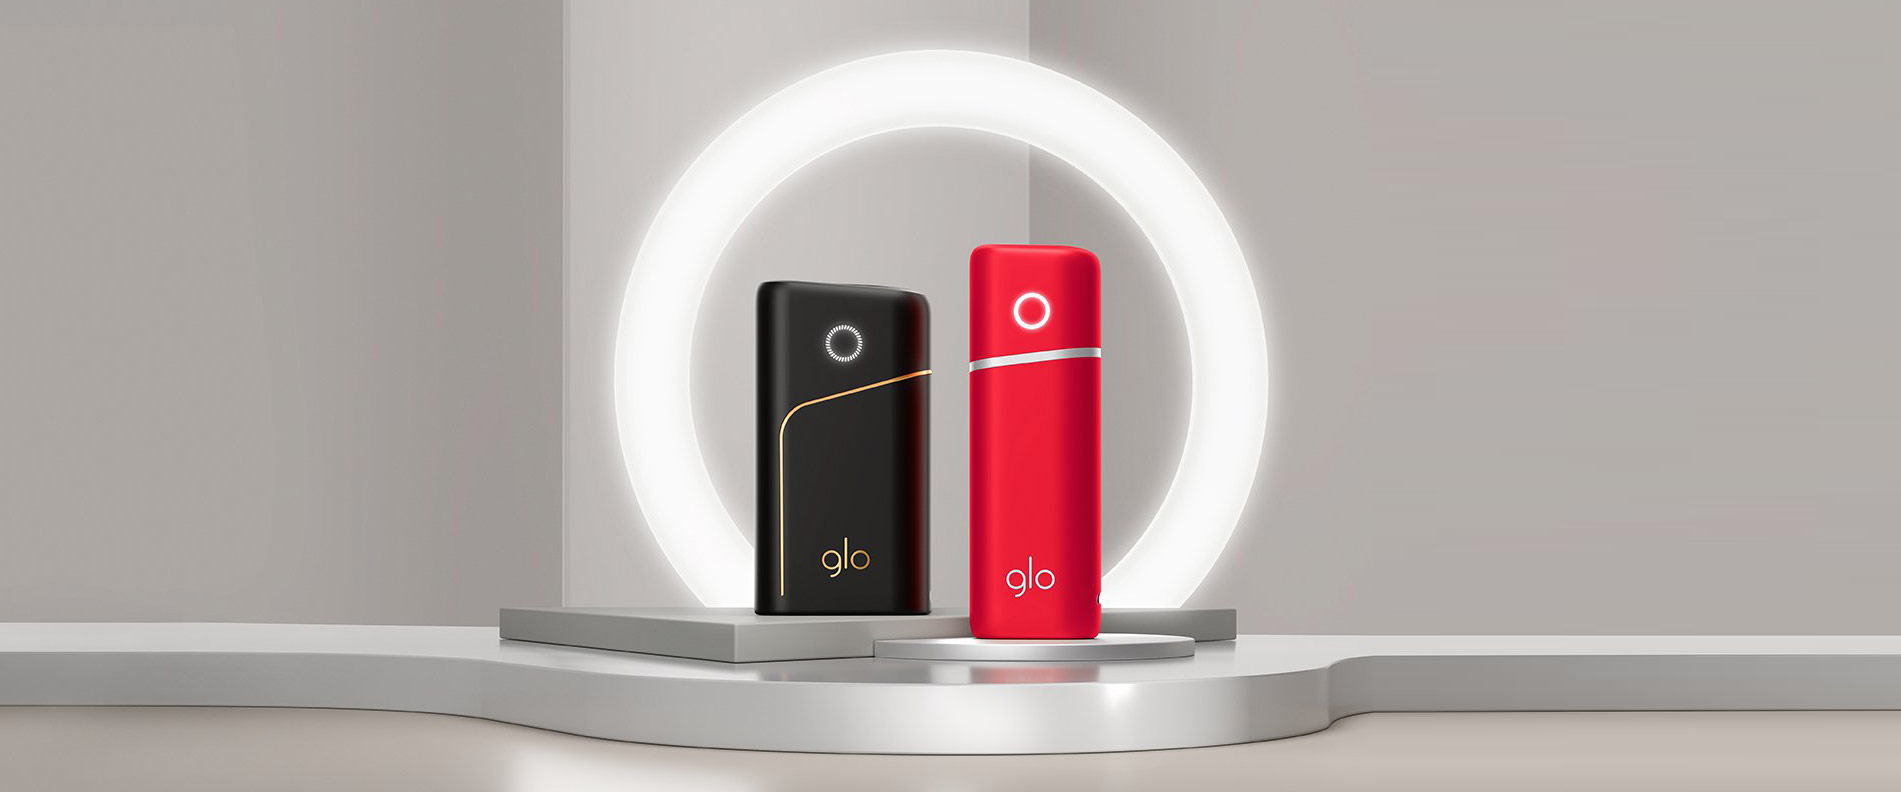 BAT launches new products: Glo Nano and Glo Pro